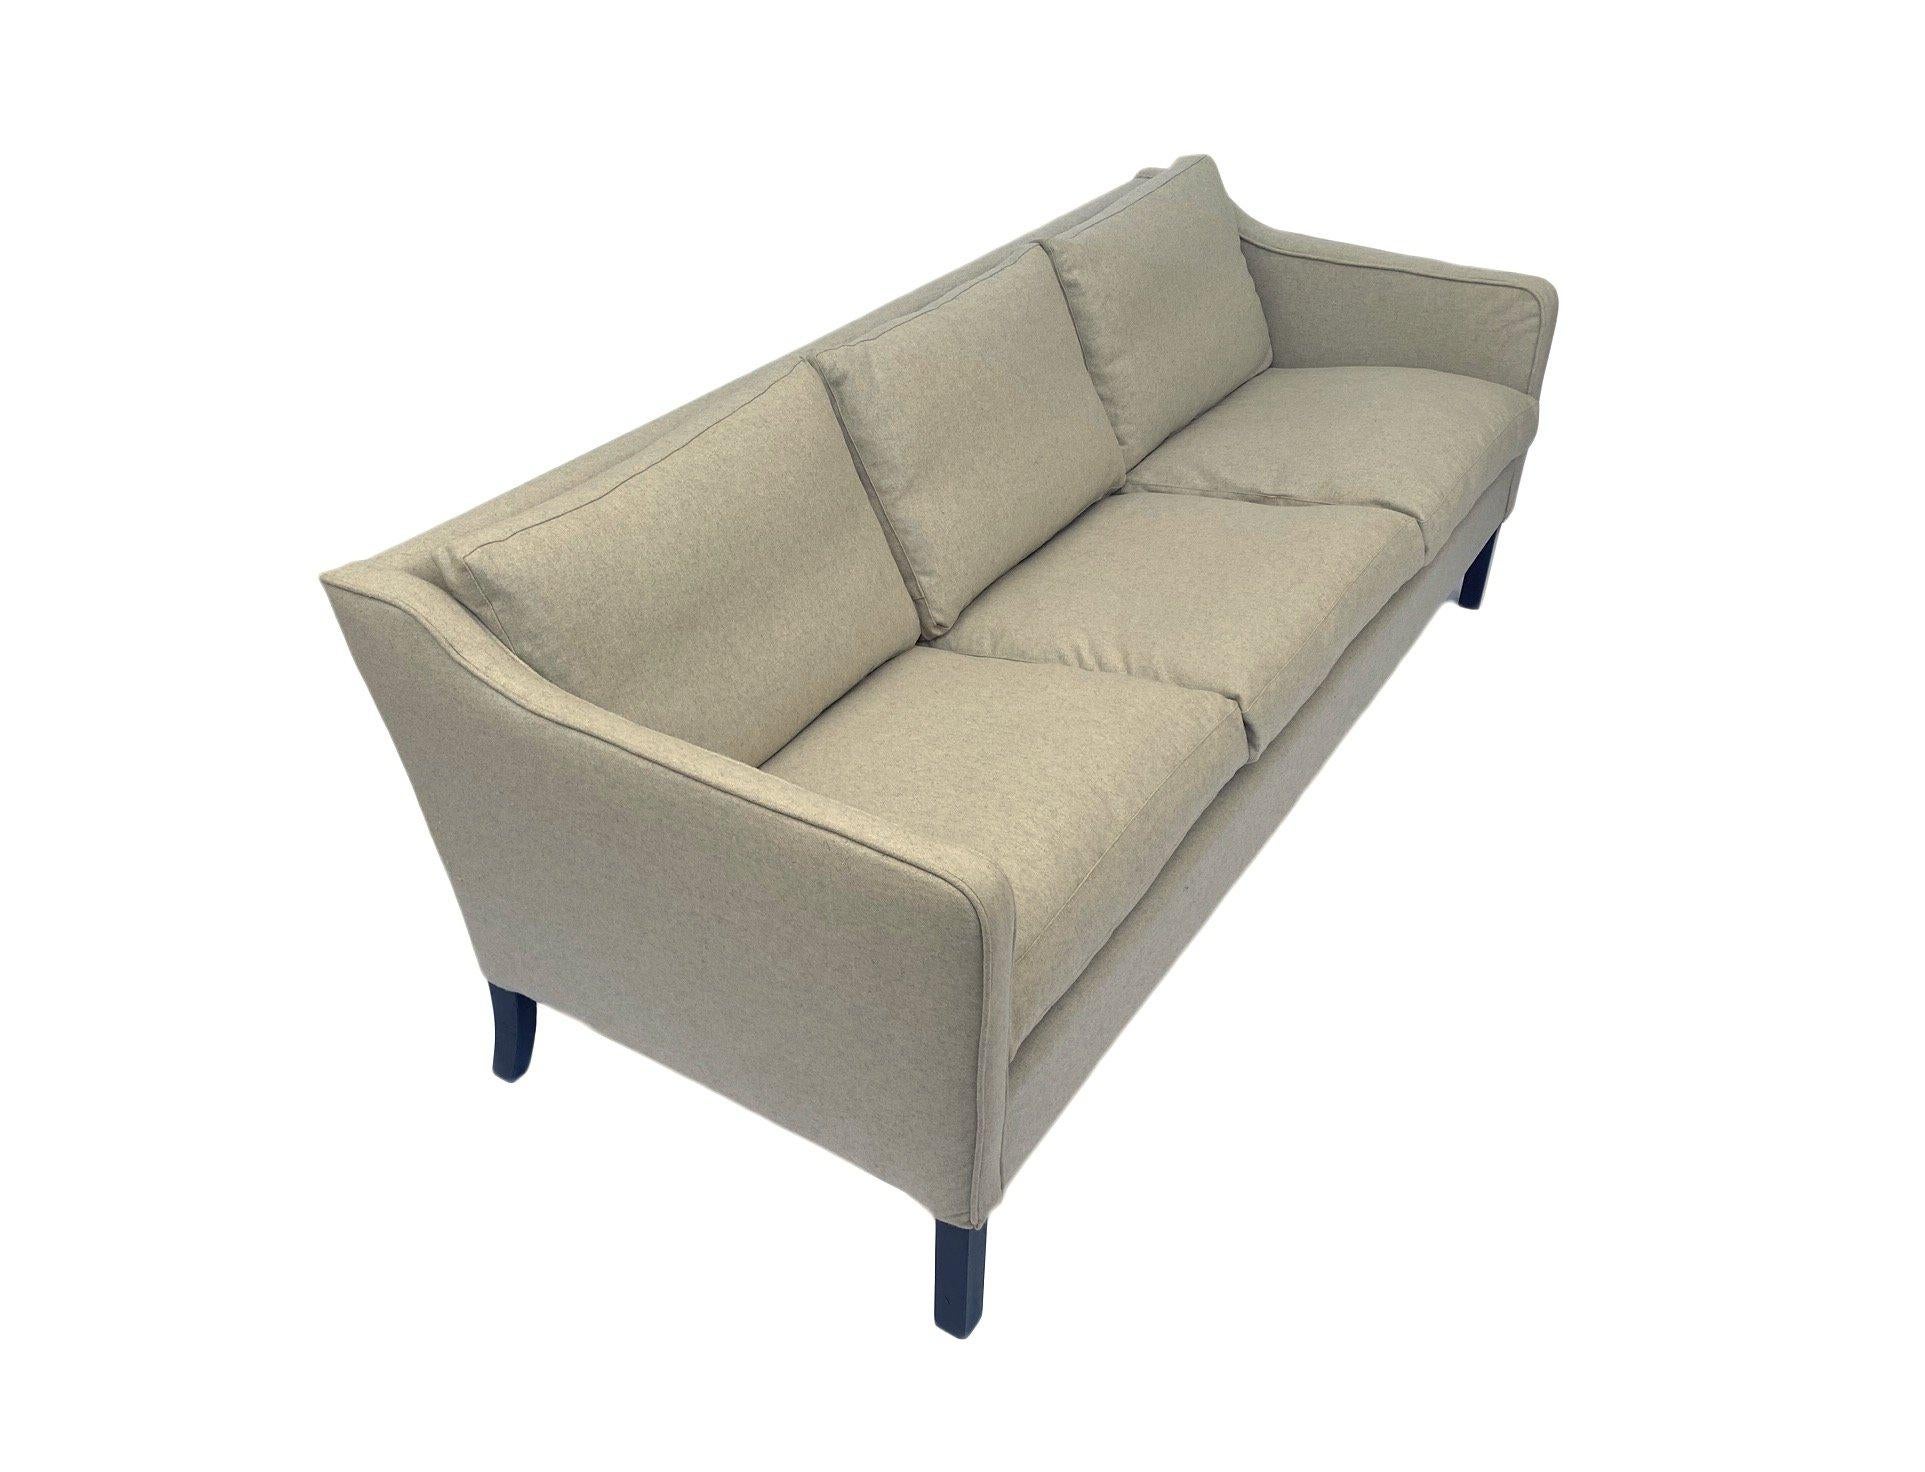 A beautiful Danish cream wool 3 seater sofa, this would make a stylish addition to any living or work area.

The sofa has a padded armrests and feather cushions for enhanced comfort. A striking piece of classic Scandinavian furniture.

The sofa